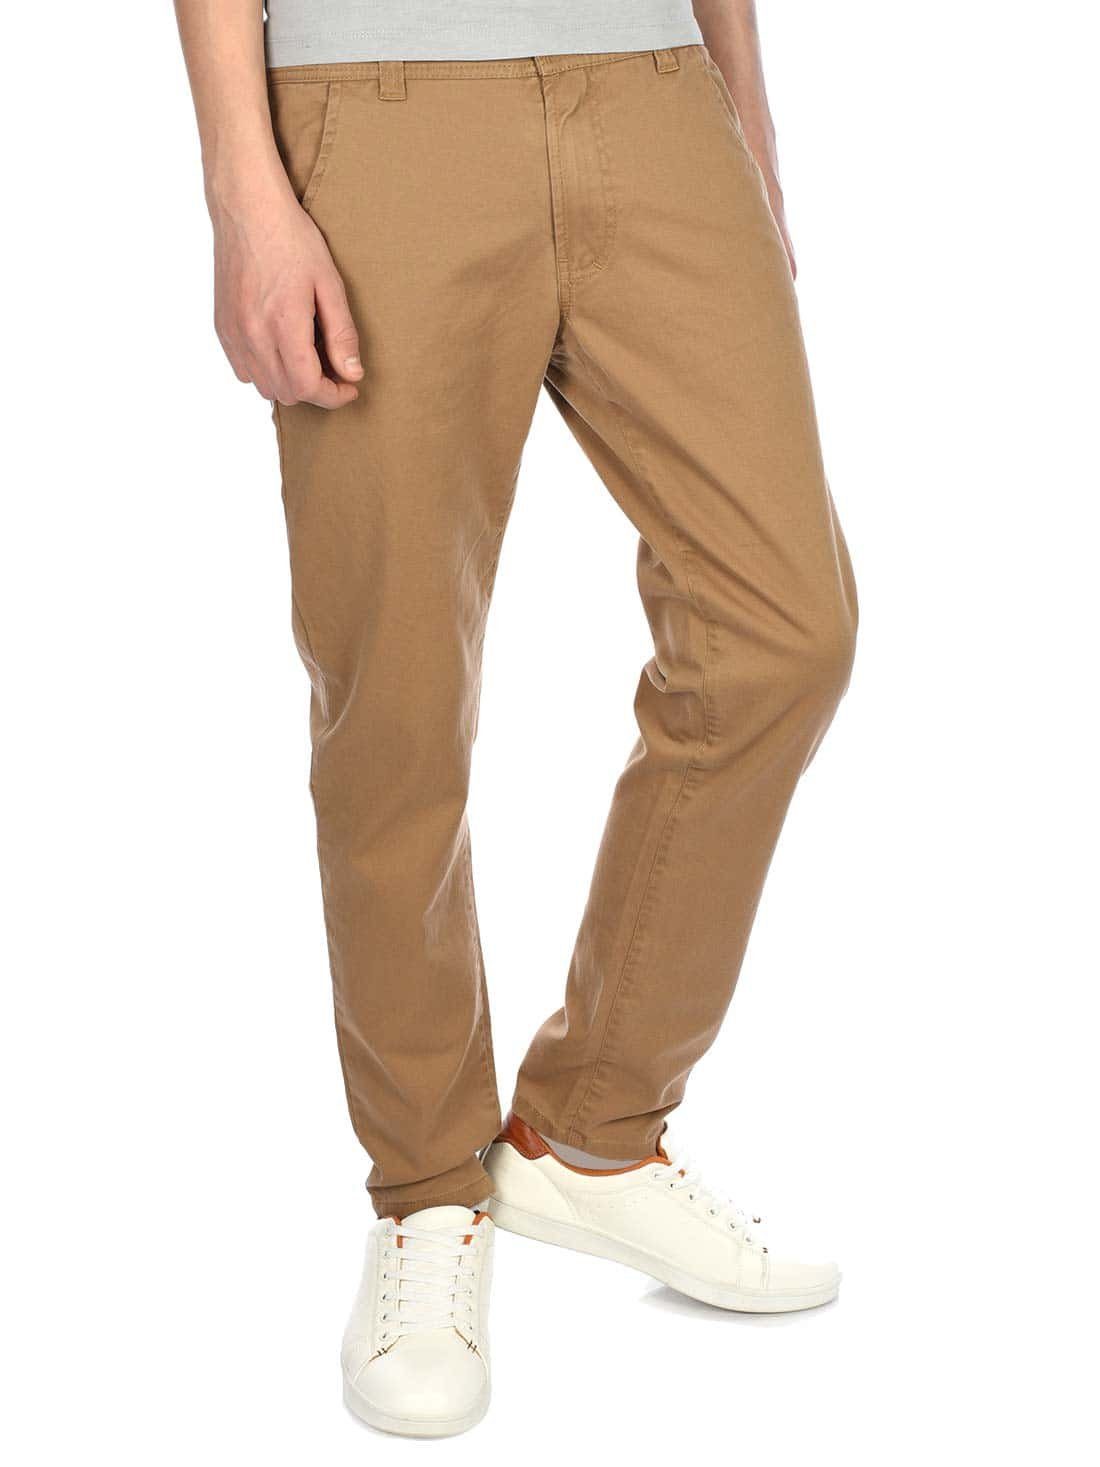 BEZLIT Chinohose casual Beige (1-tlg) Chino Jungen Hose